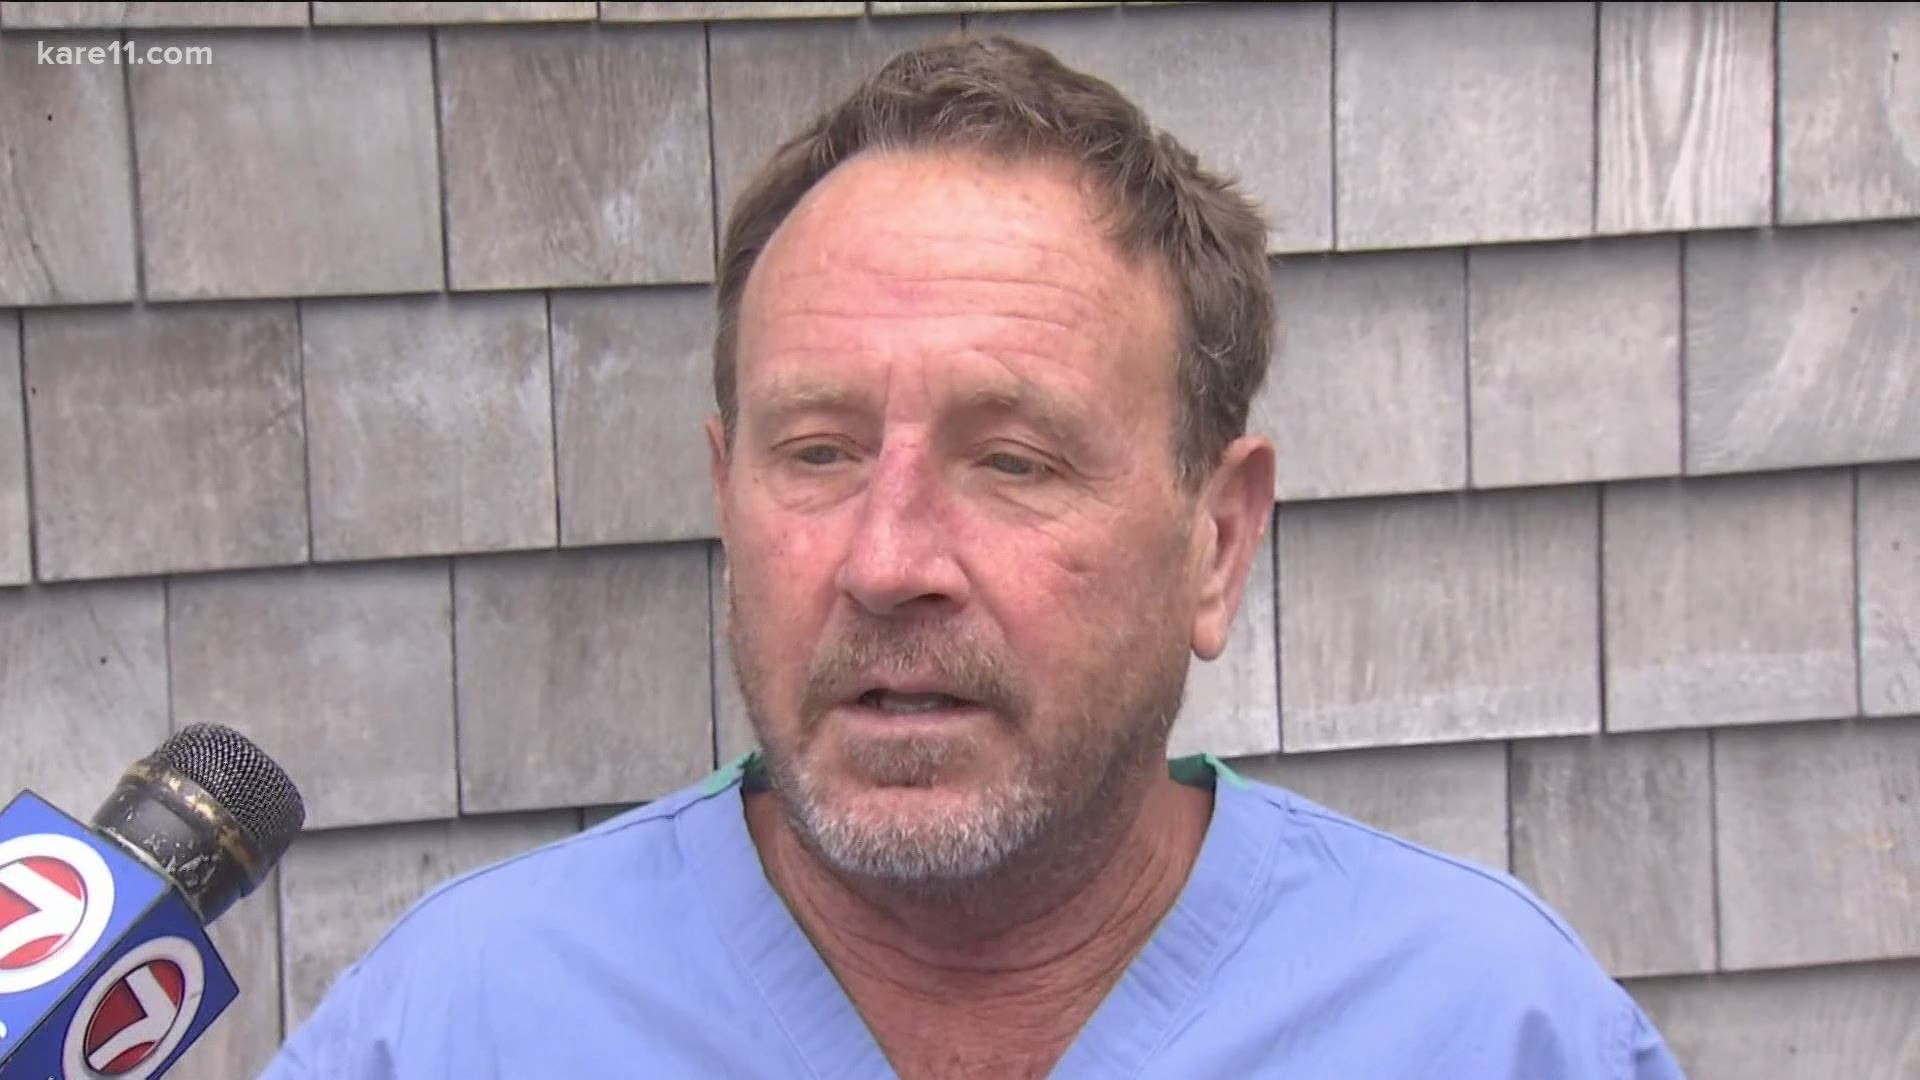 A New England lobster diver survived and is sharing the tale of how he was swallowed and spit out by a humpback whale off the coast of Cape Cod.